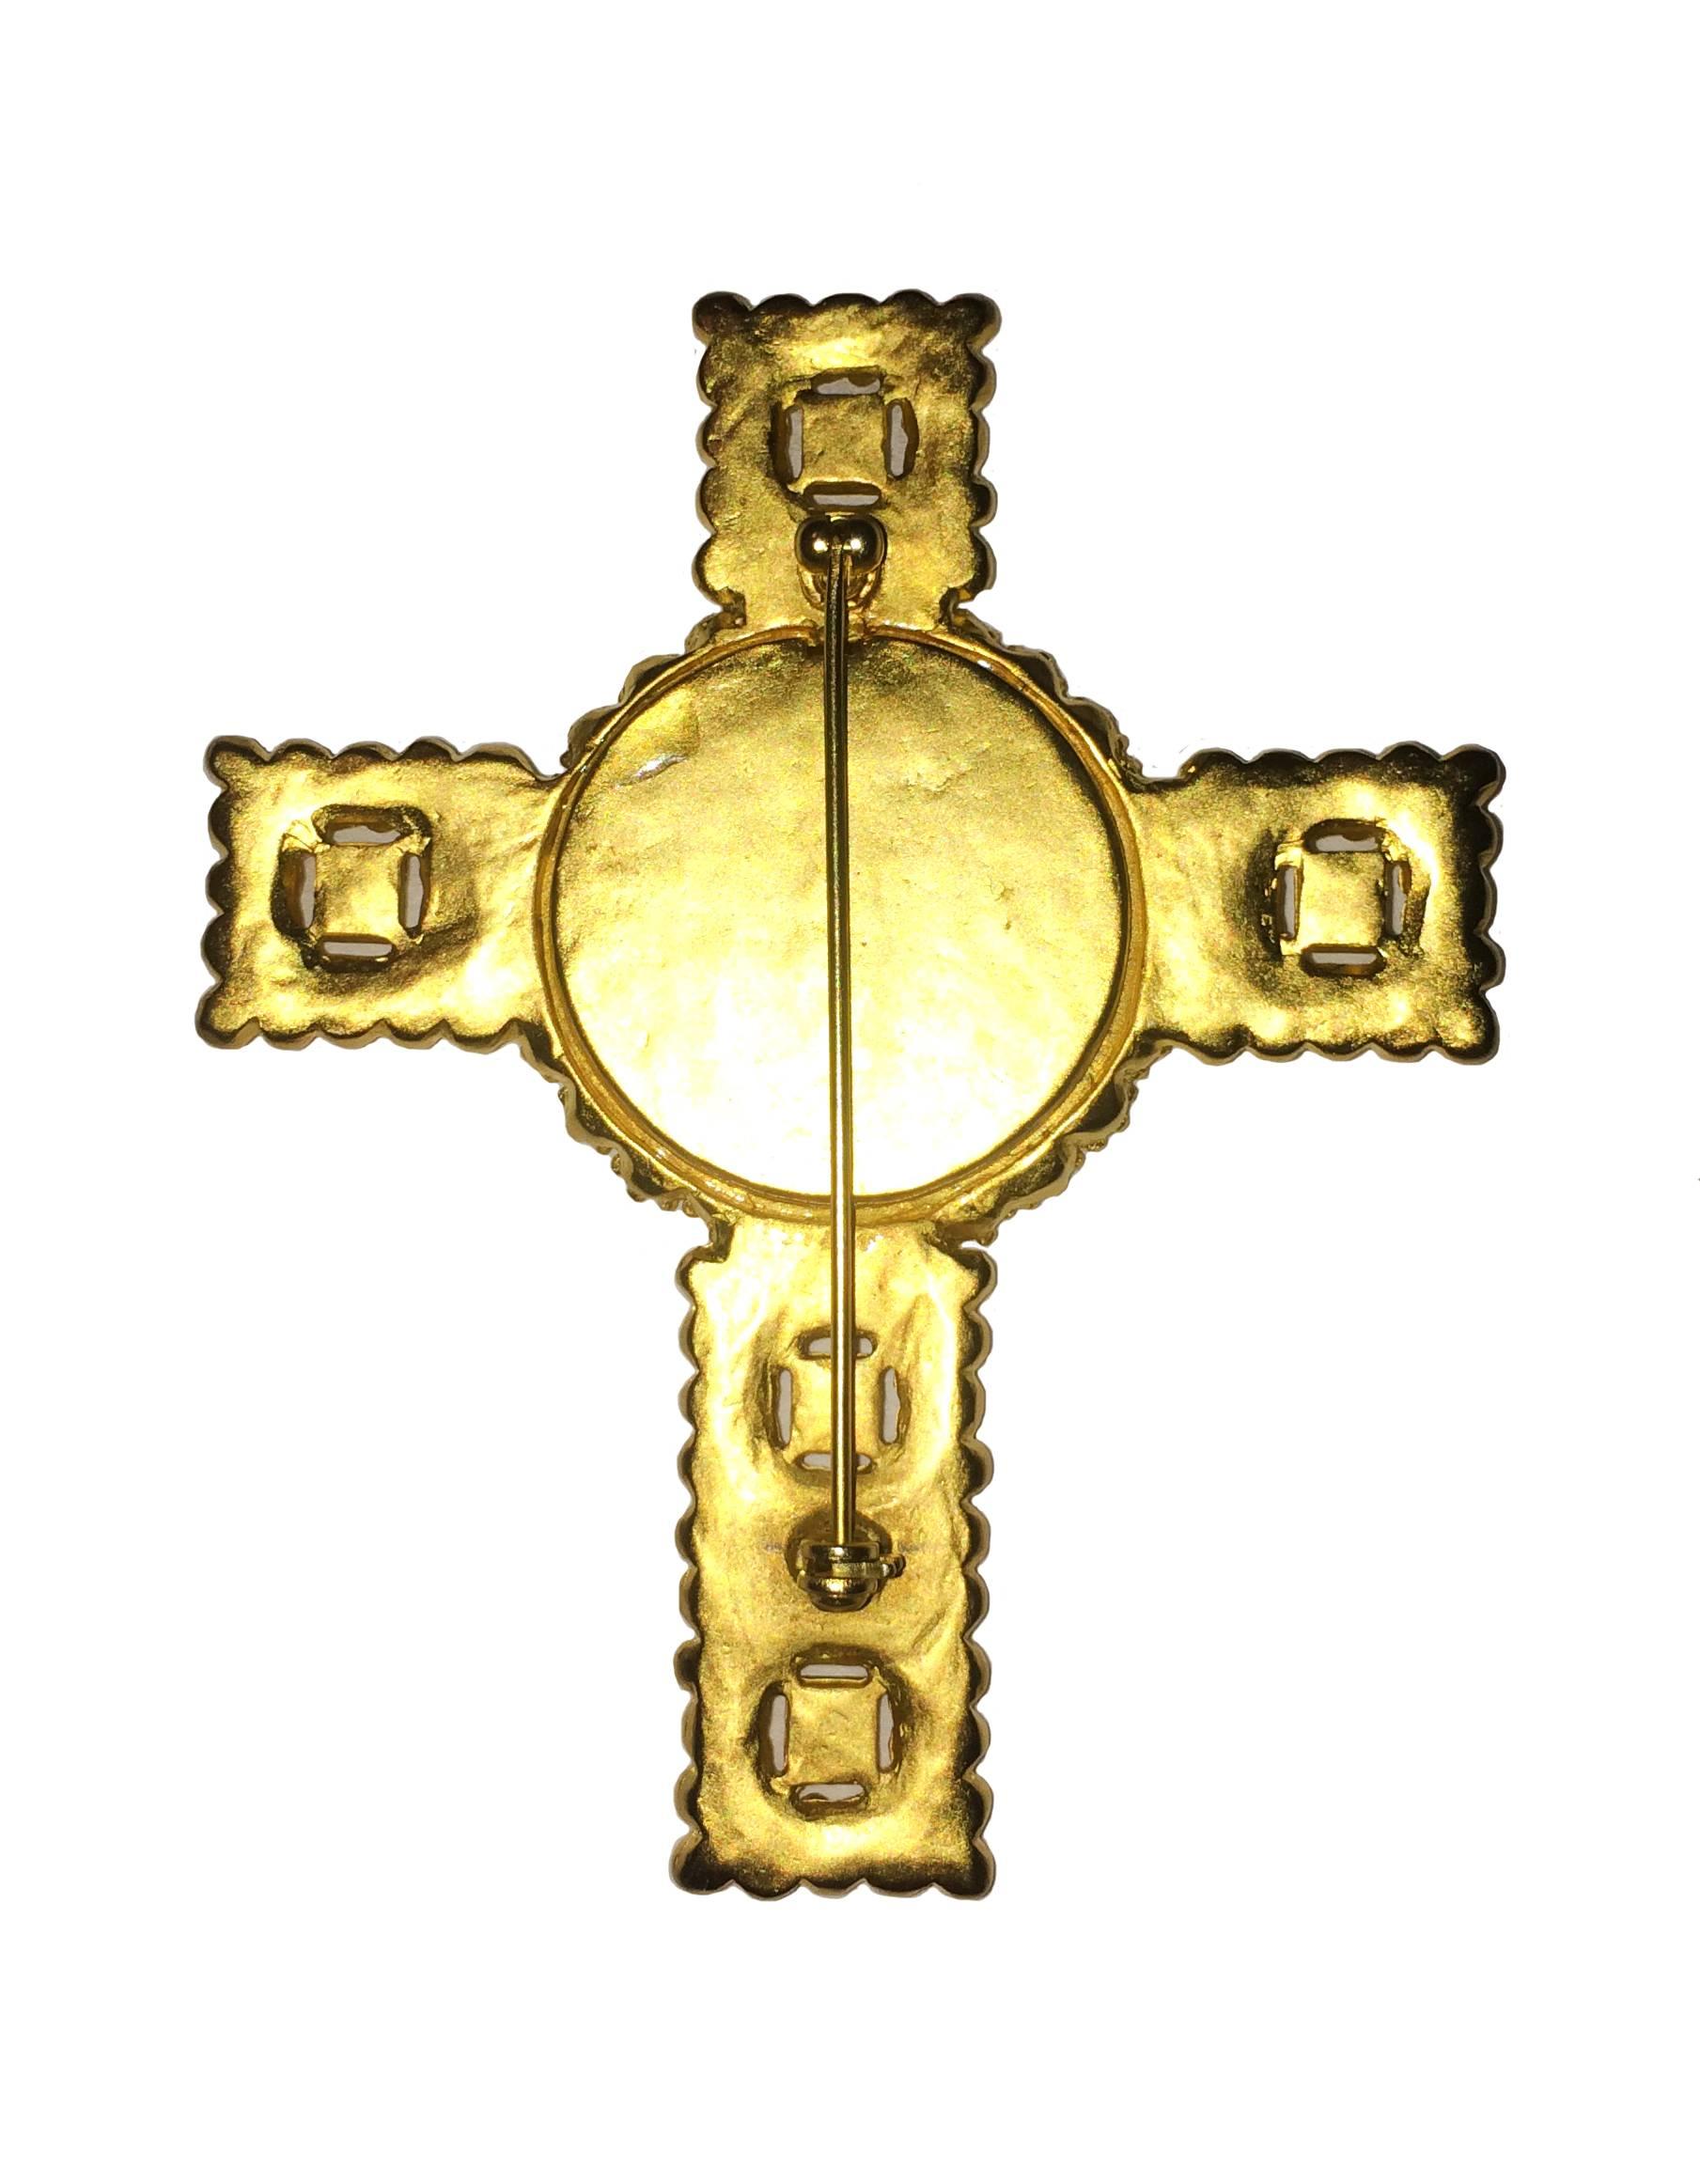  Vintage 90's Karl Lagerfeld gold cross pin.

White porcelaine-like center with pastel enameled squares detailing the points of the cross.

Signed KL at front center.

Measures approximately 3